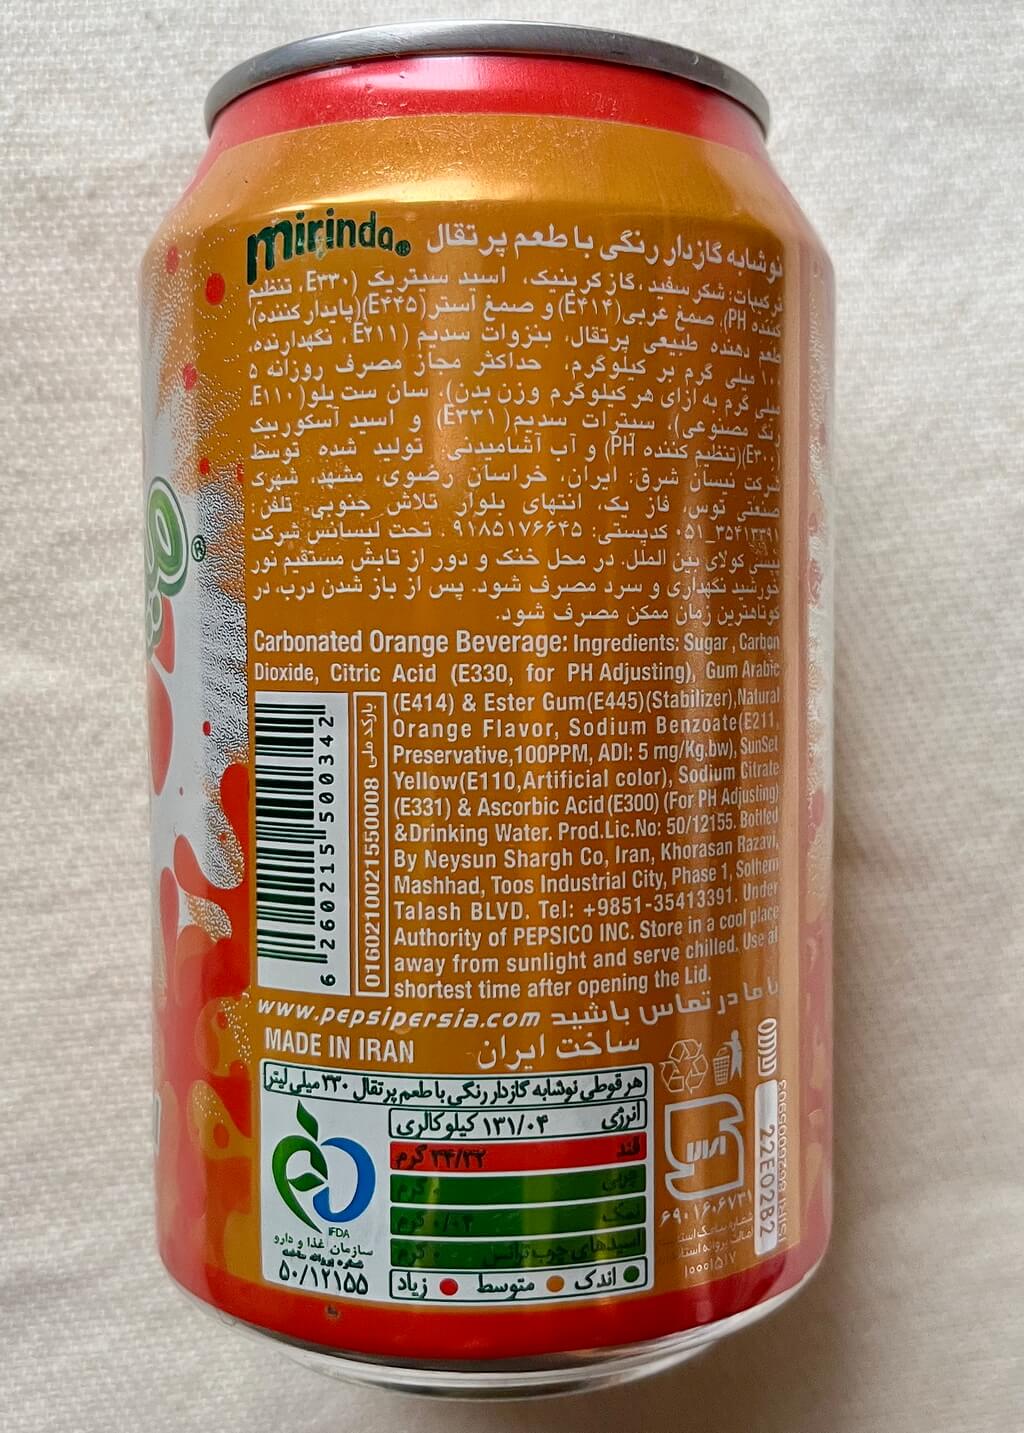 Package contains the writing in Farsi